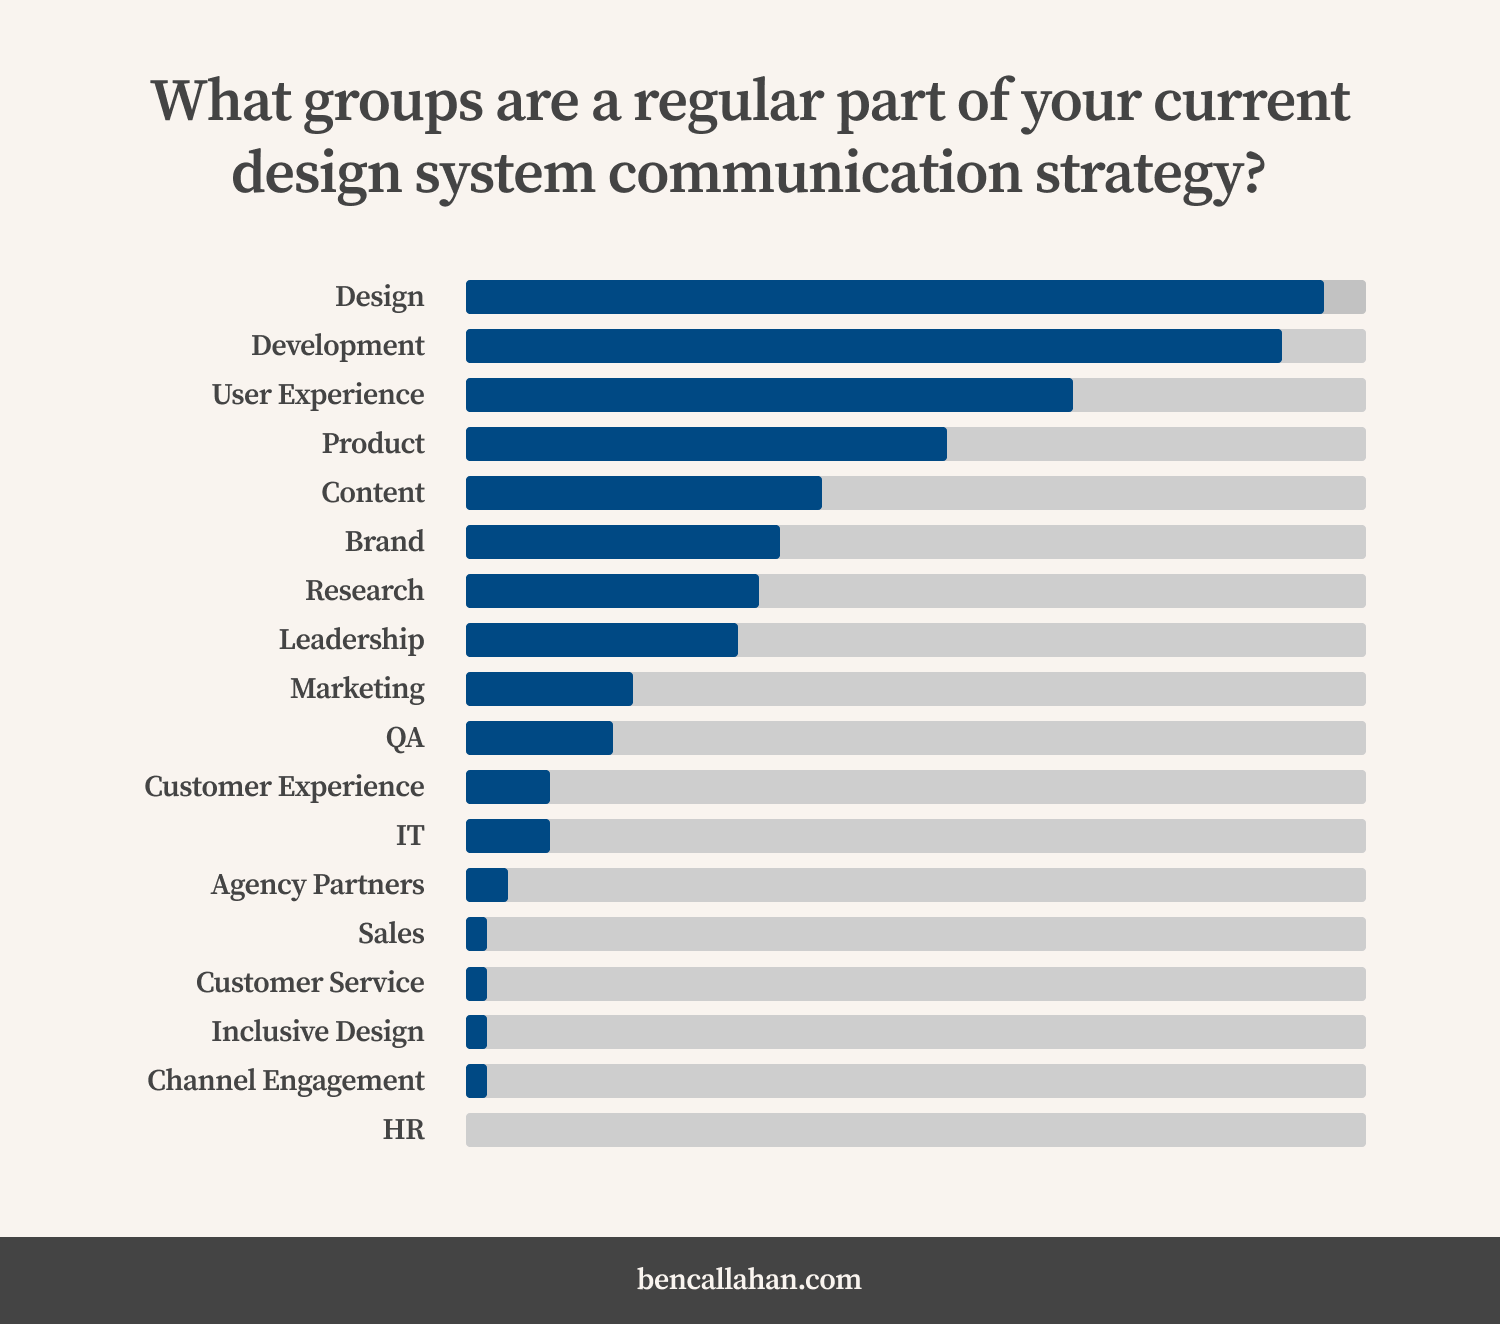 In response to the question, “What groups are a regular part of your current design system communication strategy?”: a large majority of teams are including design, development, user experience, and prduct.